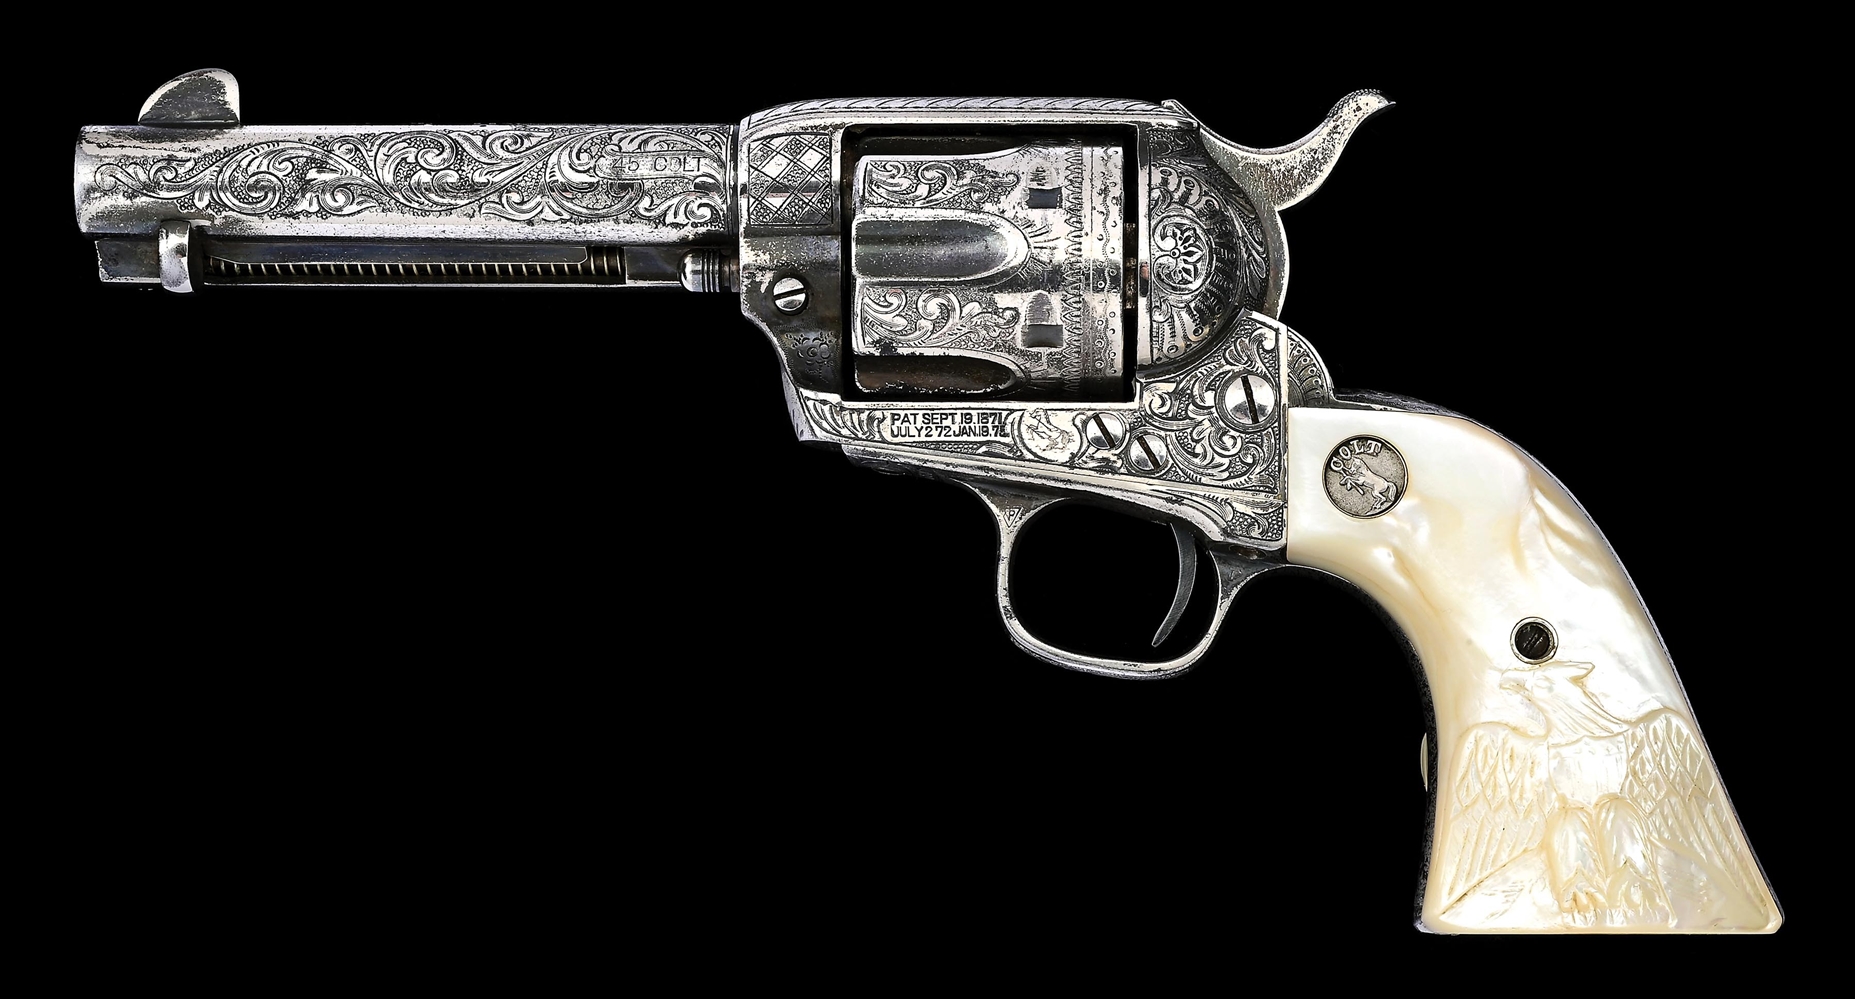 (C) FACTORY SILVER PLATED & ENGRAVED COLT SINGLE ACTION ARMY REVOLVER INSRIBED TO CHAS HOLMAN, CITY MARSHALL OF ROSENBERG, TEXAS, WITH HOLSTER, FACTORY LETTER, & RESEARCH (1917).